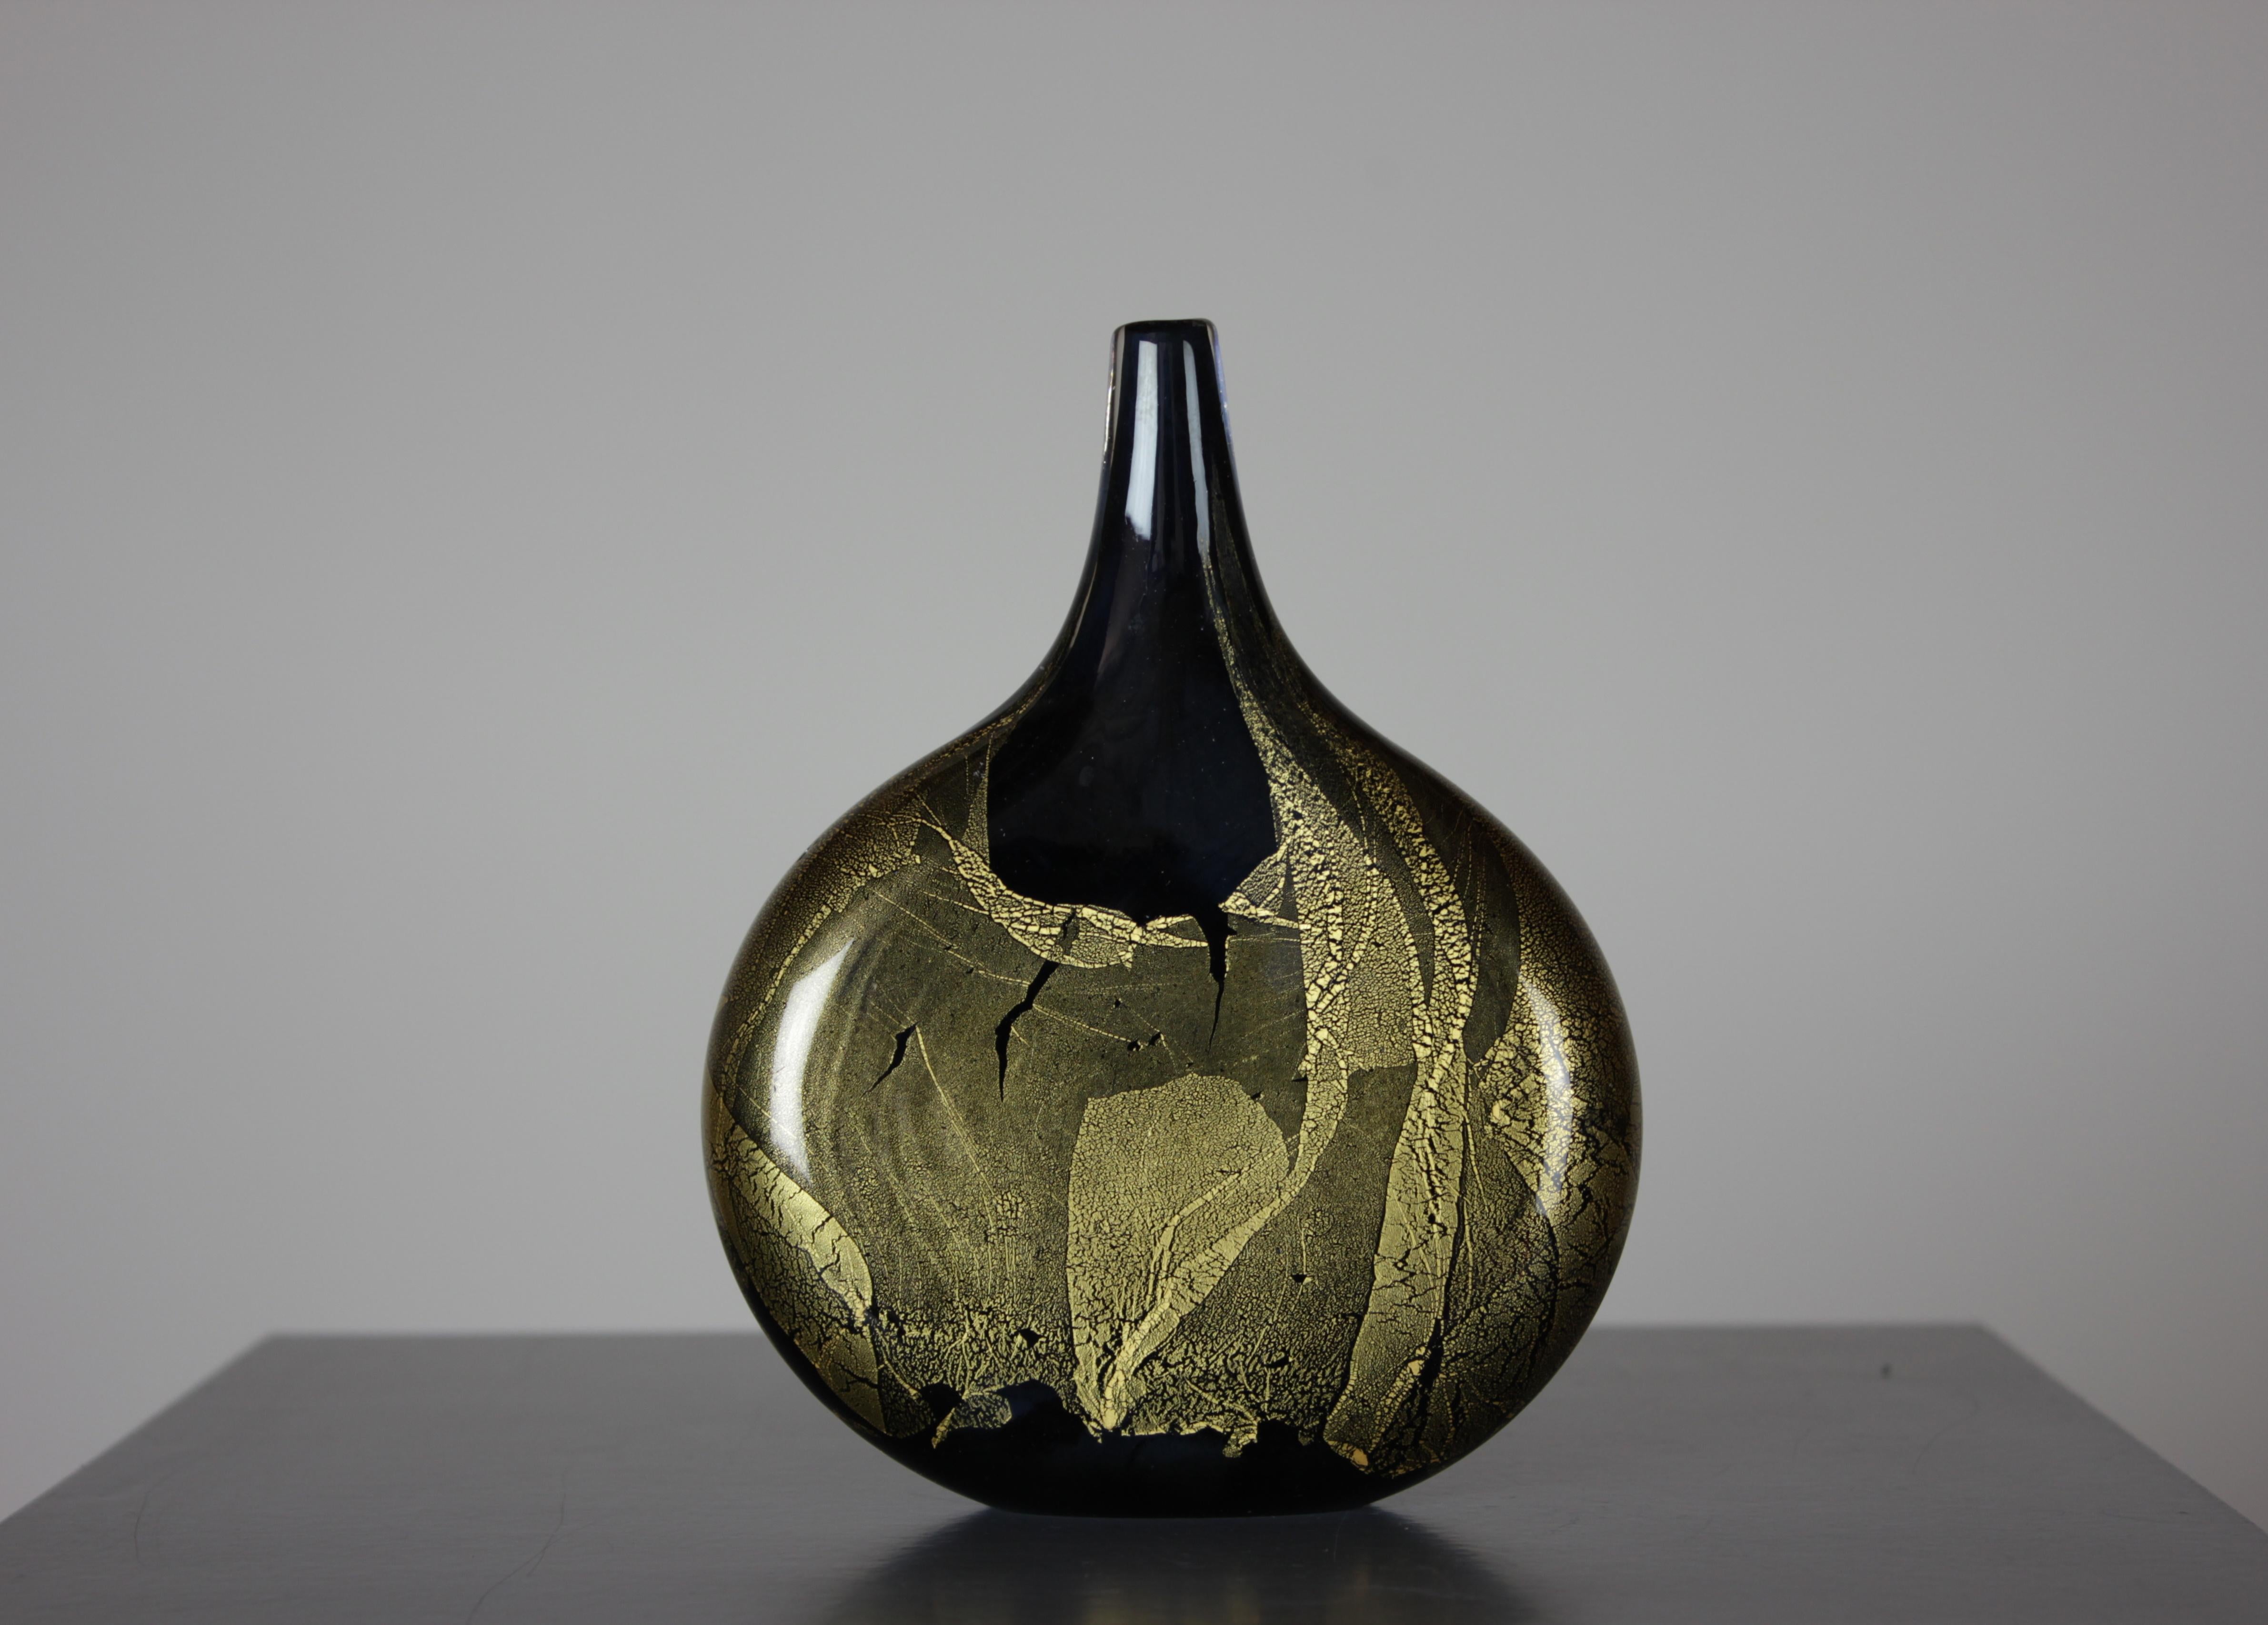 Modern 20th Century Glass Art Vase by Michael Harris for Isle of Wight Glass, 1980s For Sale